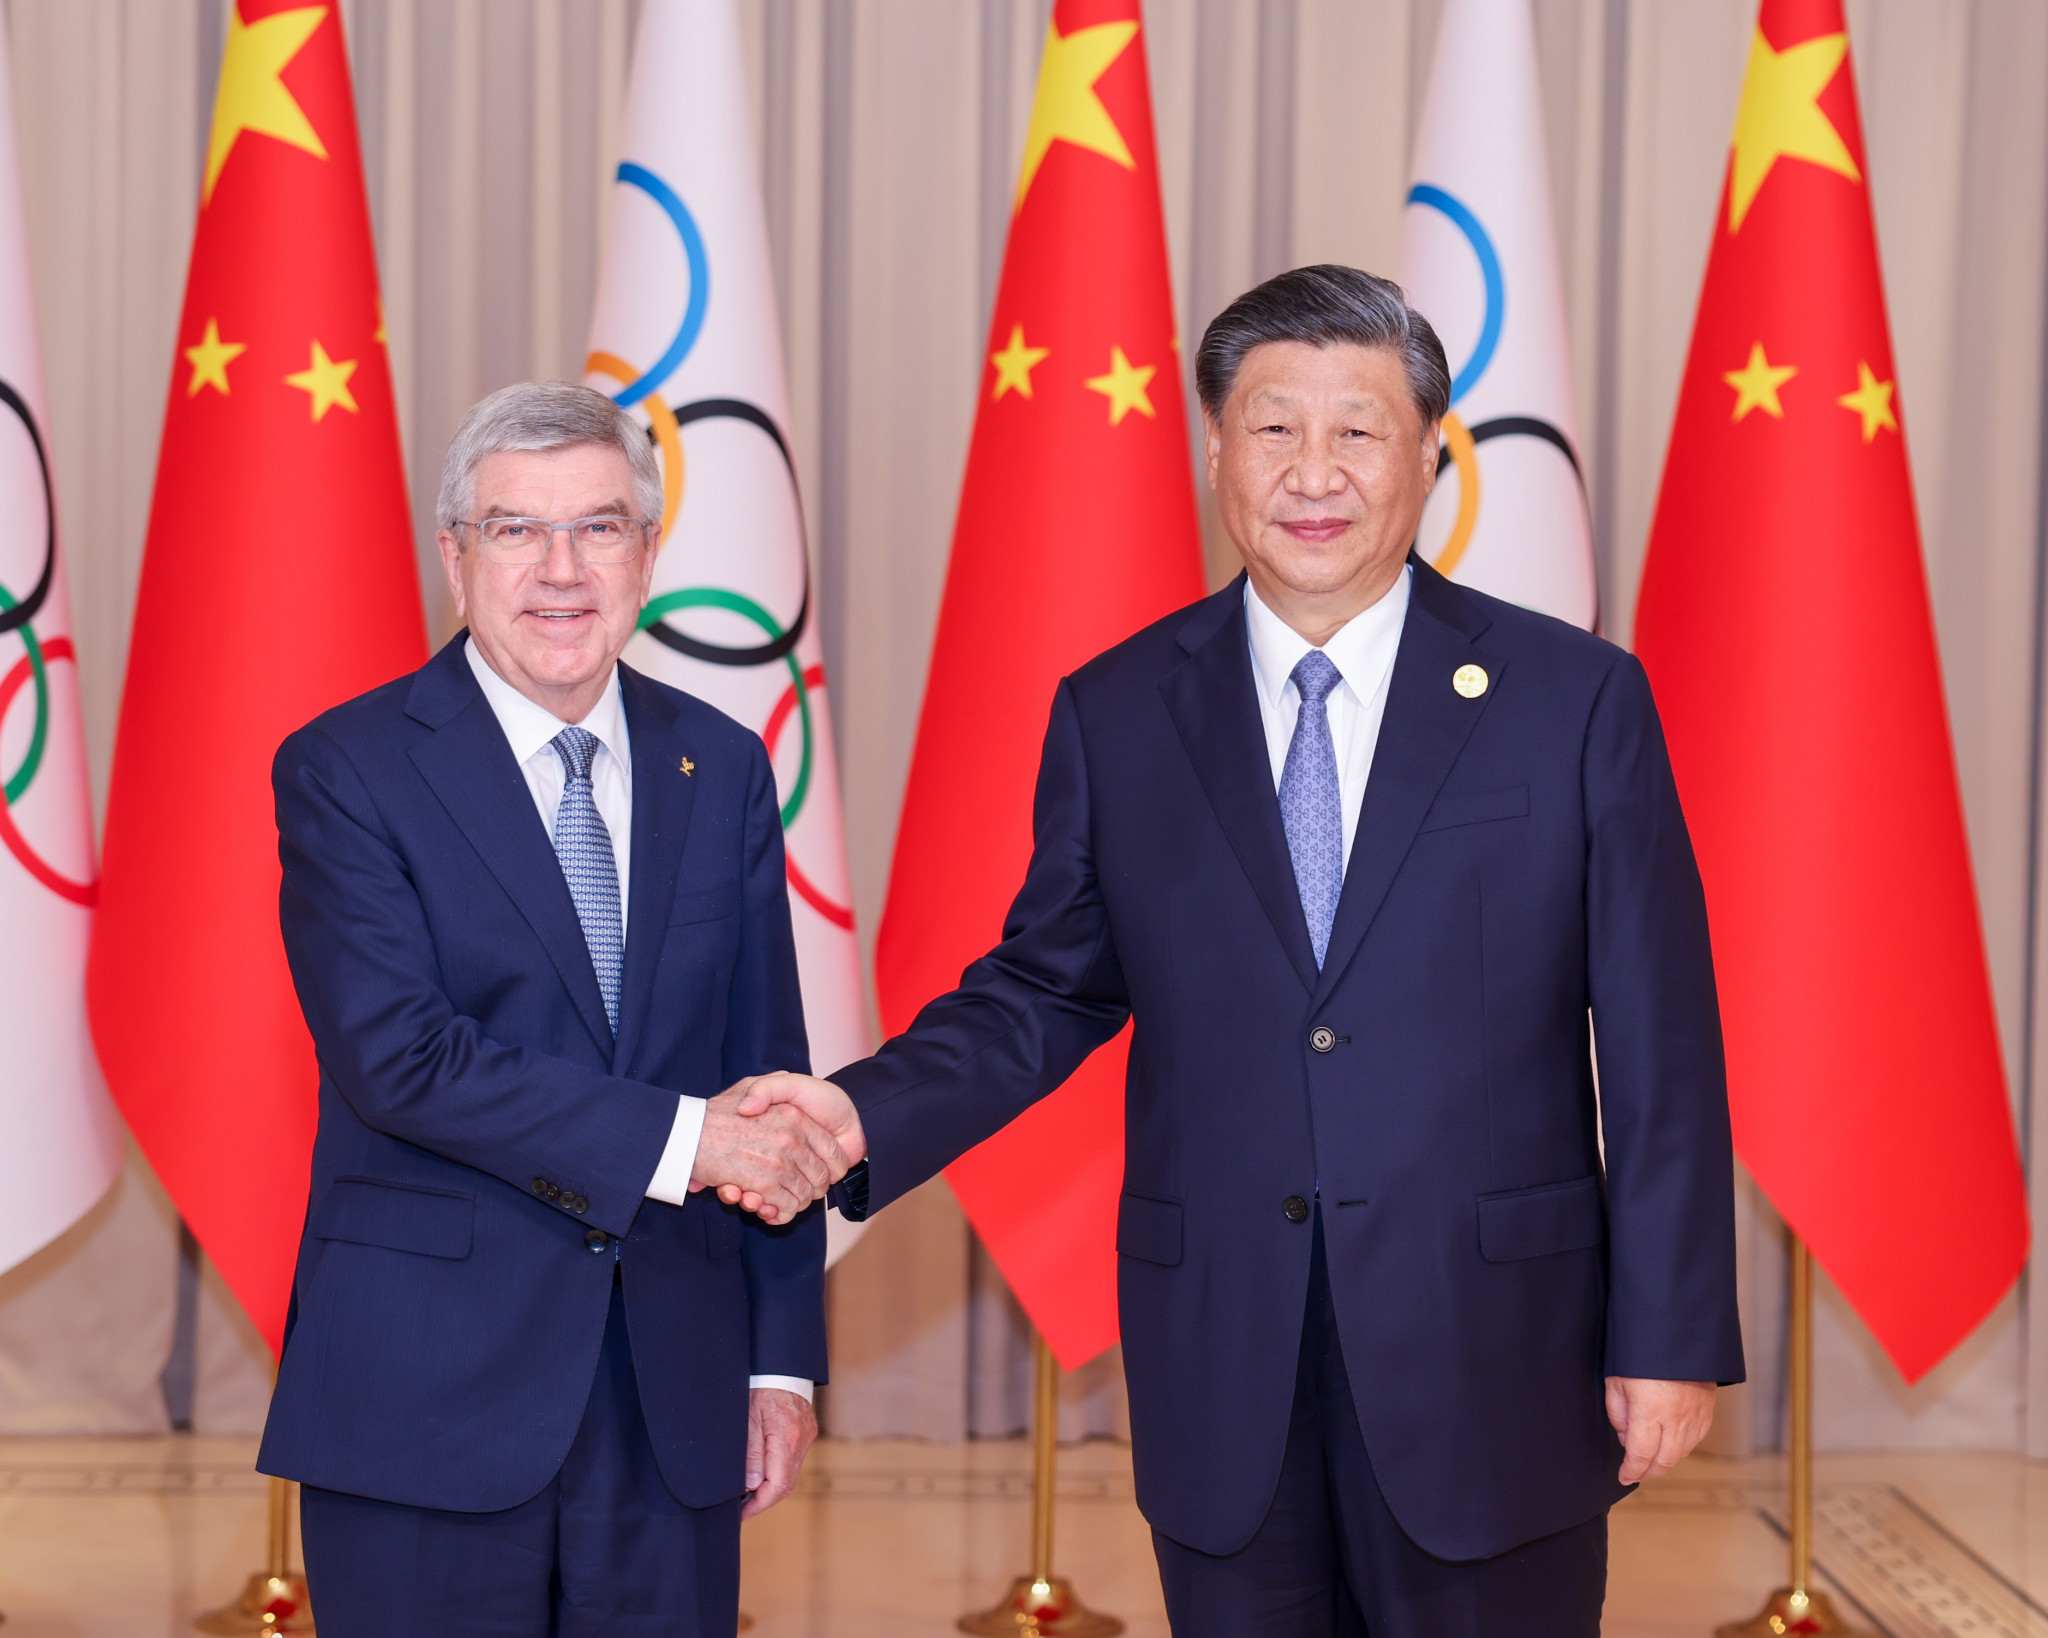 Xi praises IOC’s "non-politicisation of sports" after meeting Bach in Hangzhou